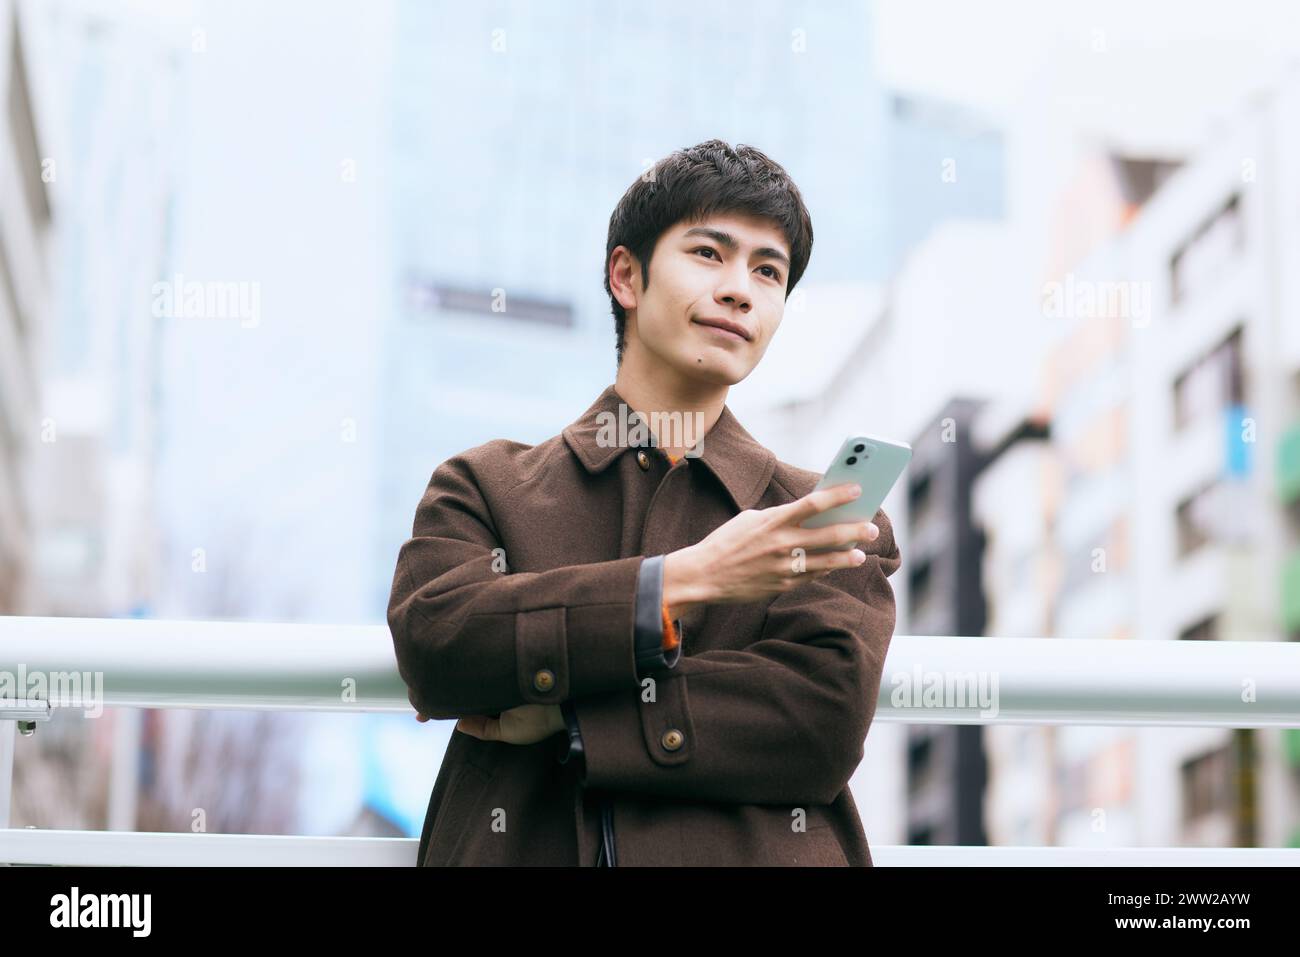 Asian man in coat holding phone in city Stock Photo